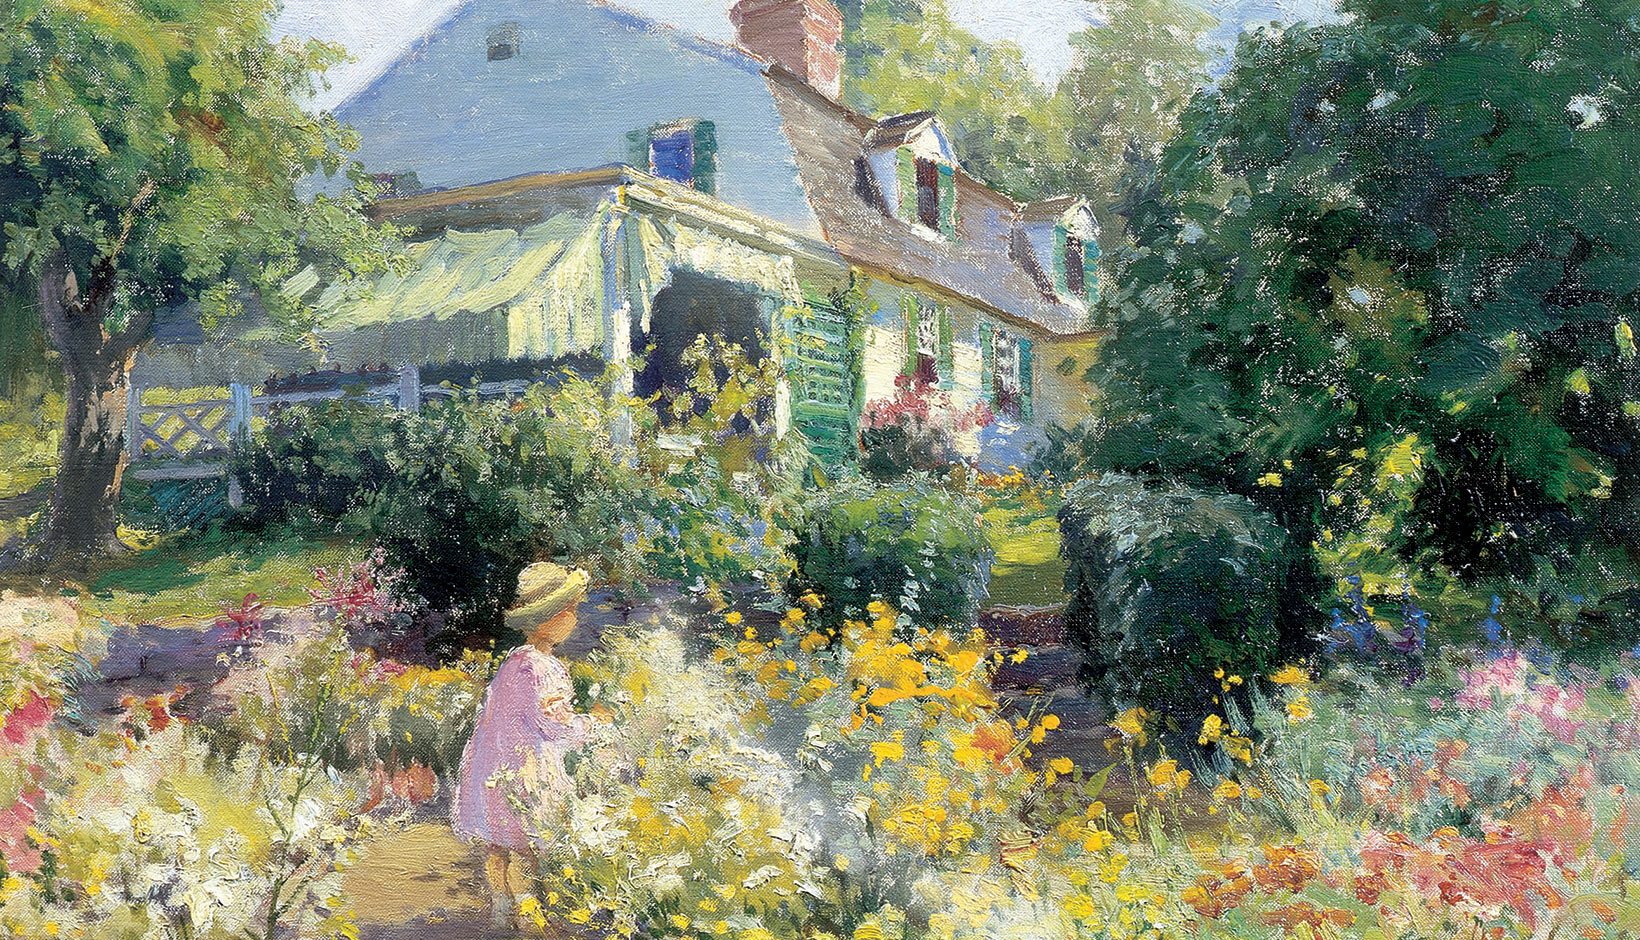 garden matilda american impressionism browne gardens impressionists impressionist oil museum voorhees painters peonies florence griswold idylls farm canvas brown florencegriswoldmuseum